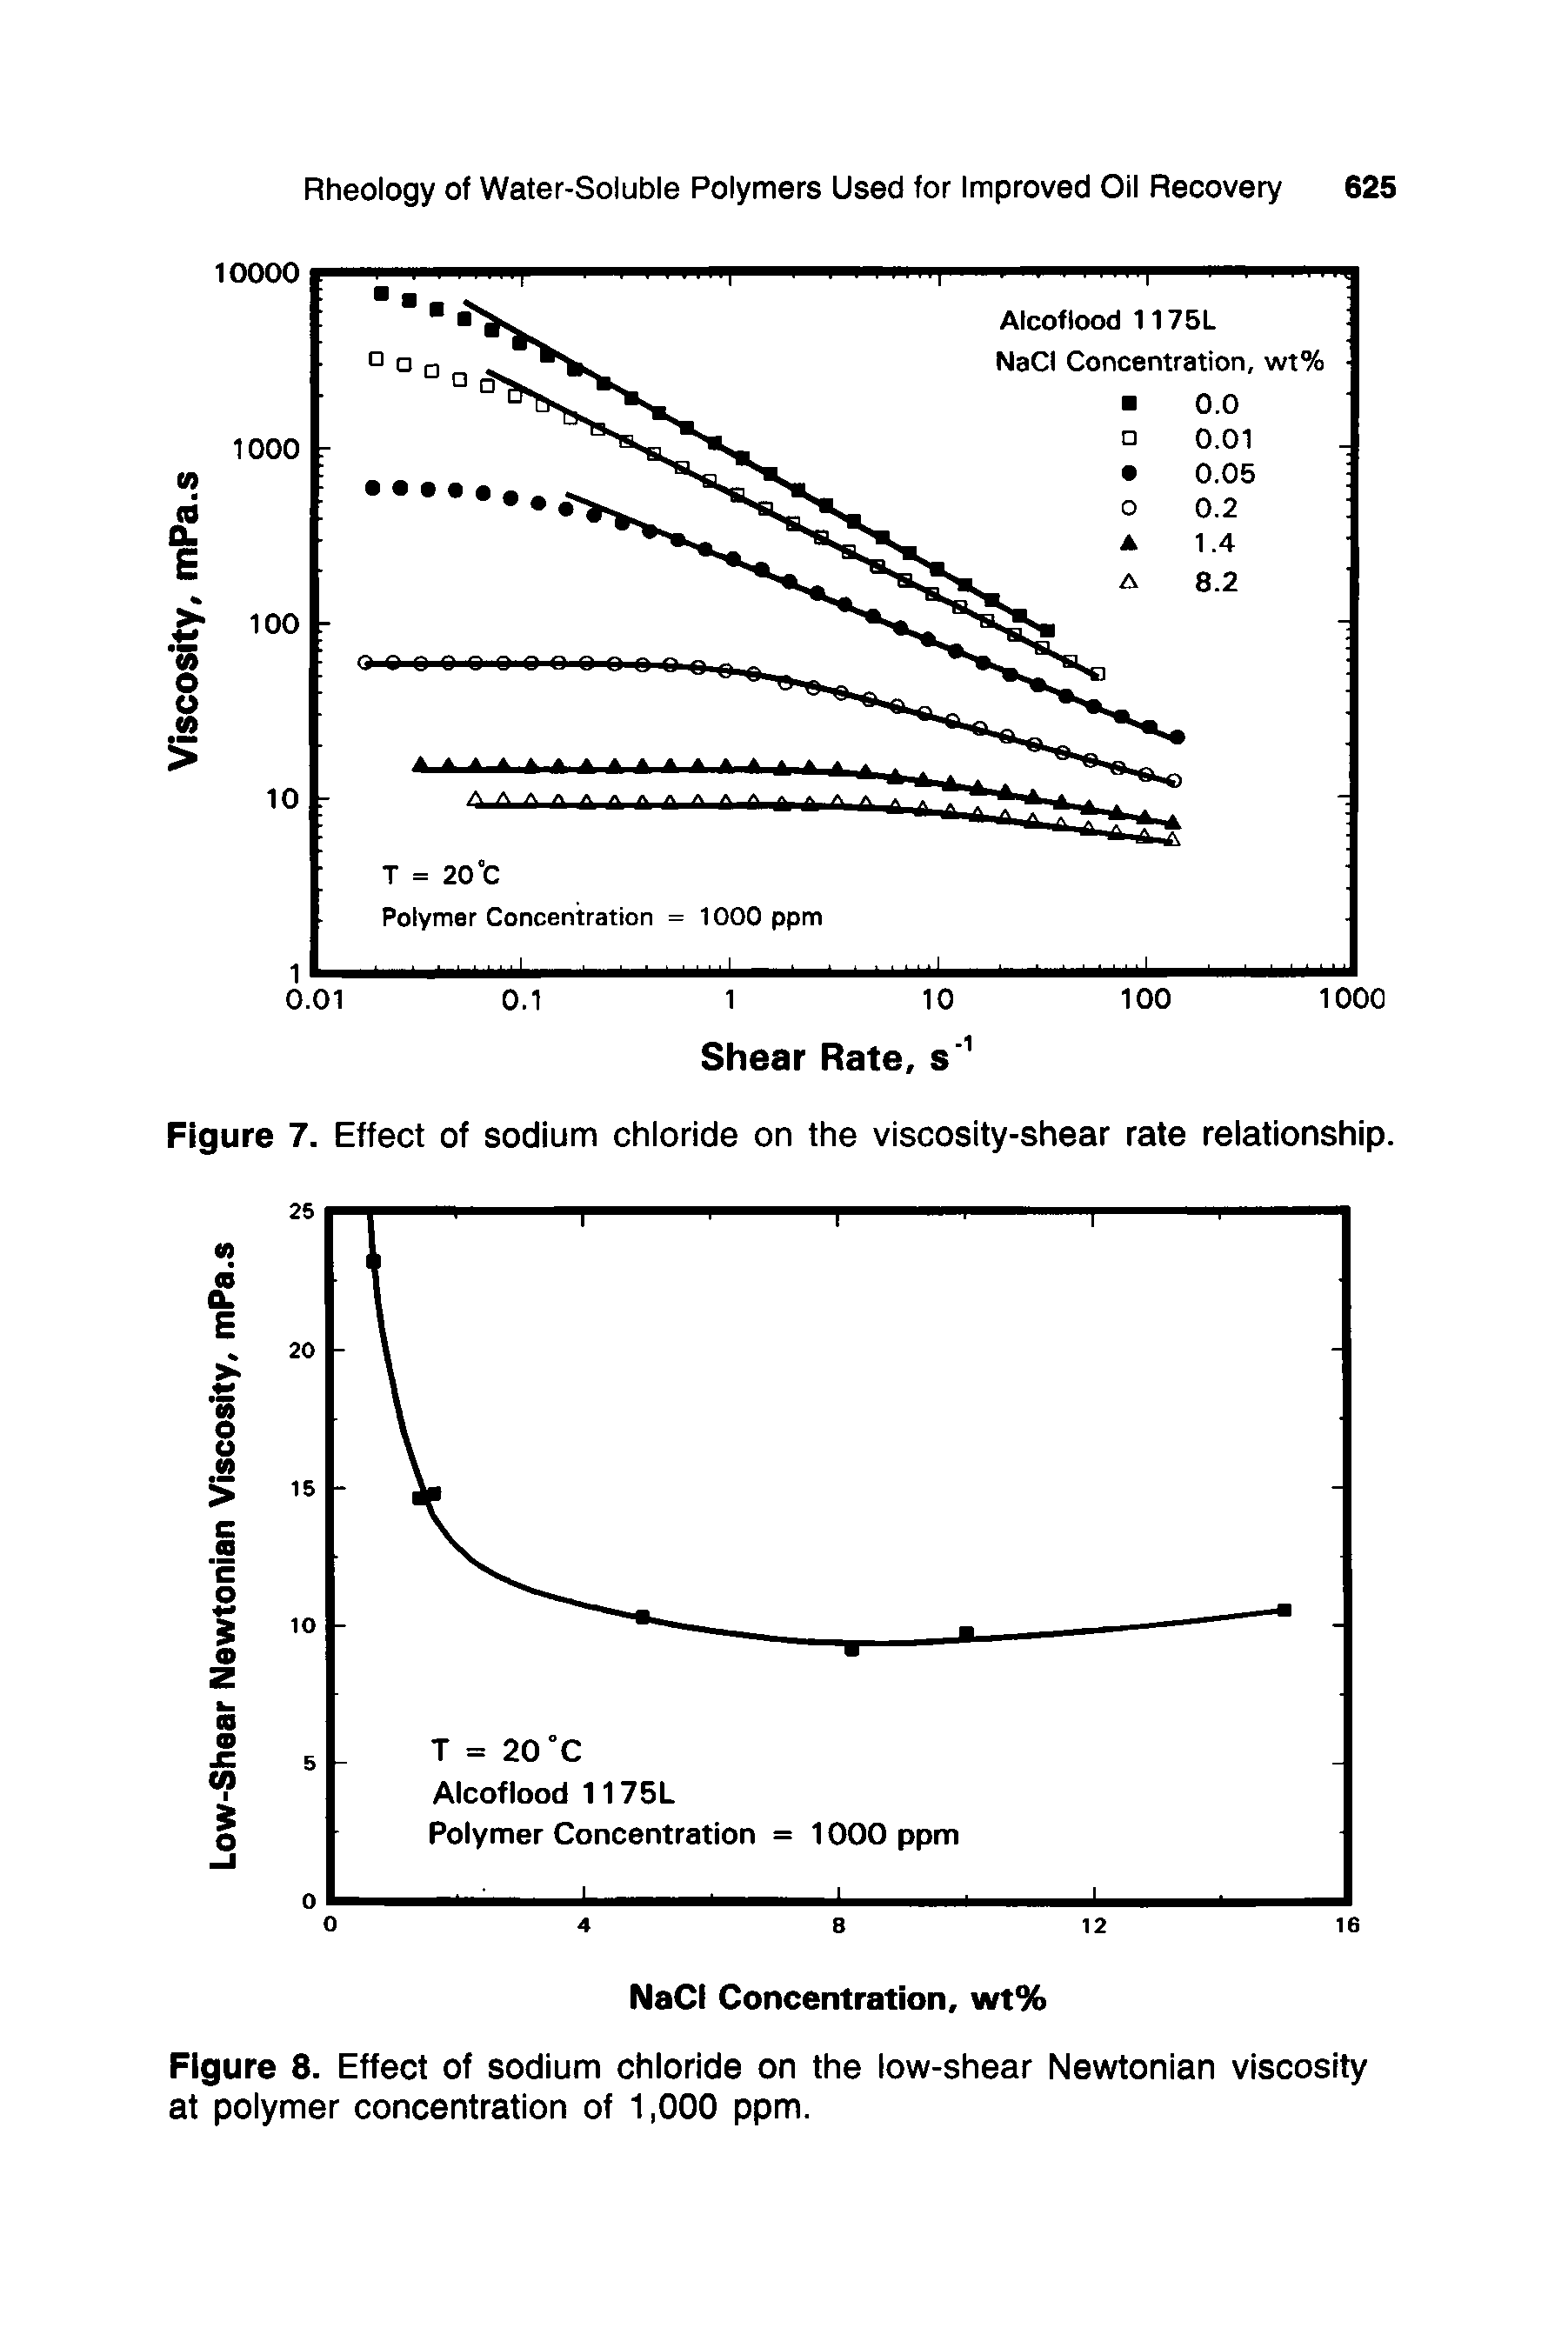 Figure 8. Effect of sodium chloride on the low-shear Newtonian viscosity at polymer concentration of 1,000 ppm.